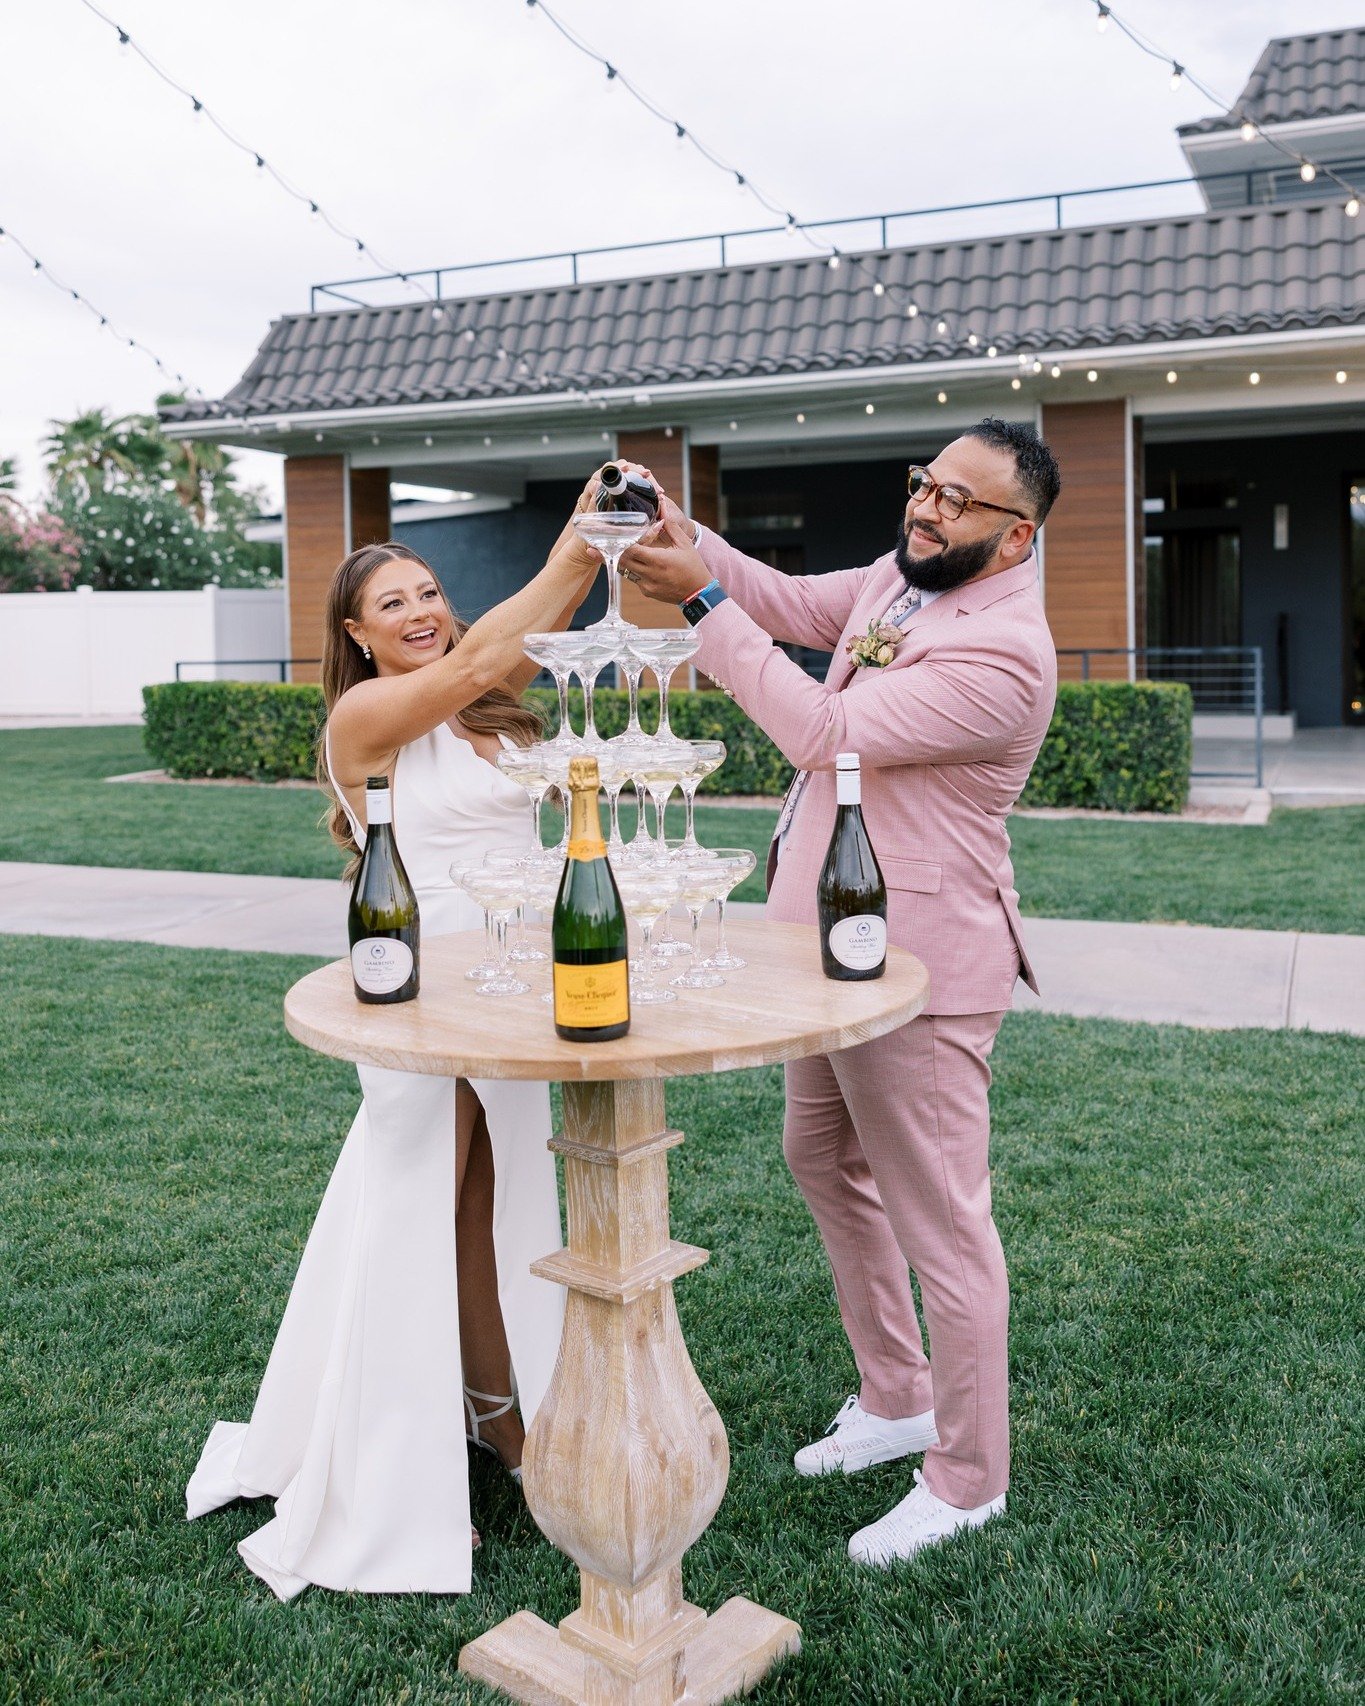 Celebrating we are in the midst of Spring Wedding Season and all of our April events were a joy to see come to life🤍
After months of planning along our couples and clients, seeing their event come to a successful completion makes our hearts happy✨

